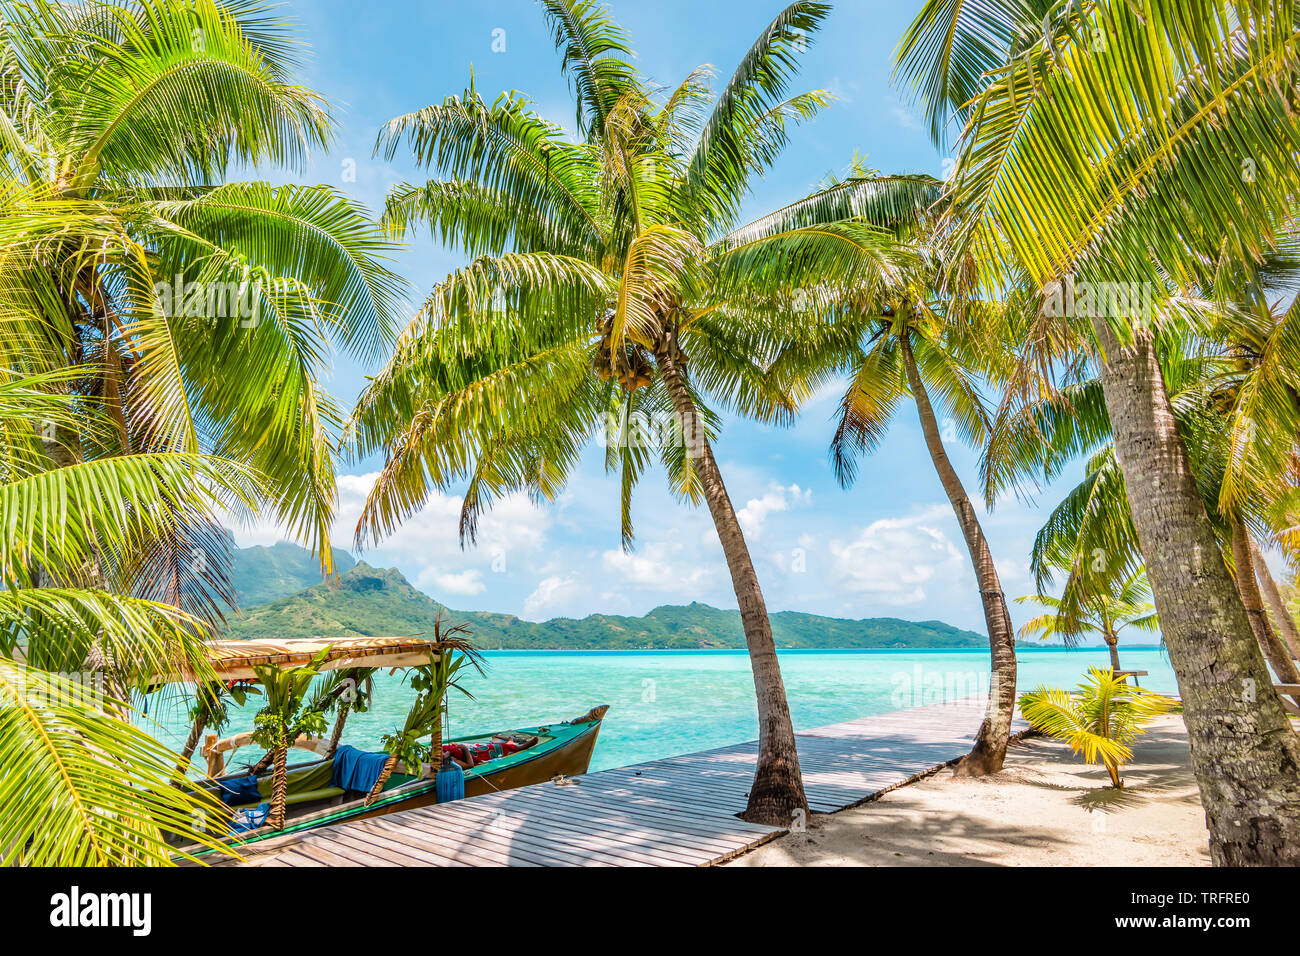 Beautiful landscape with coconut palm trees on tropical Island of Bora Bora. Decorated tourist boat moored at wooden quay. Stock Photo